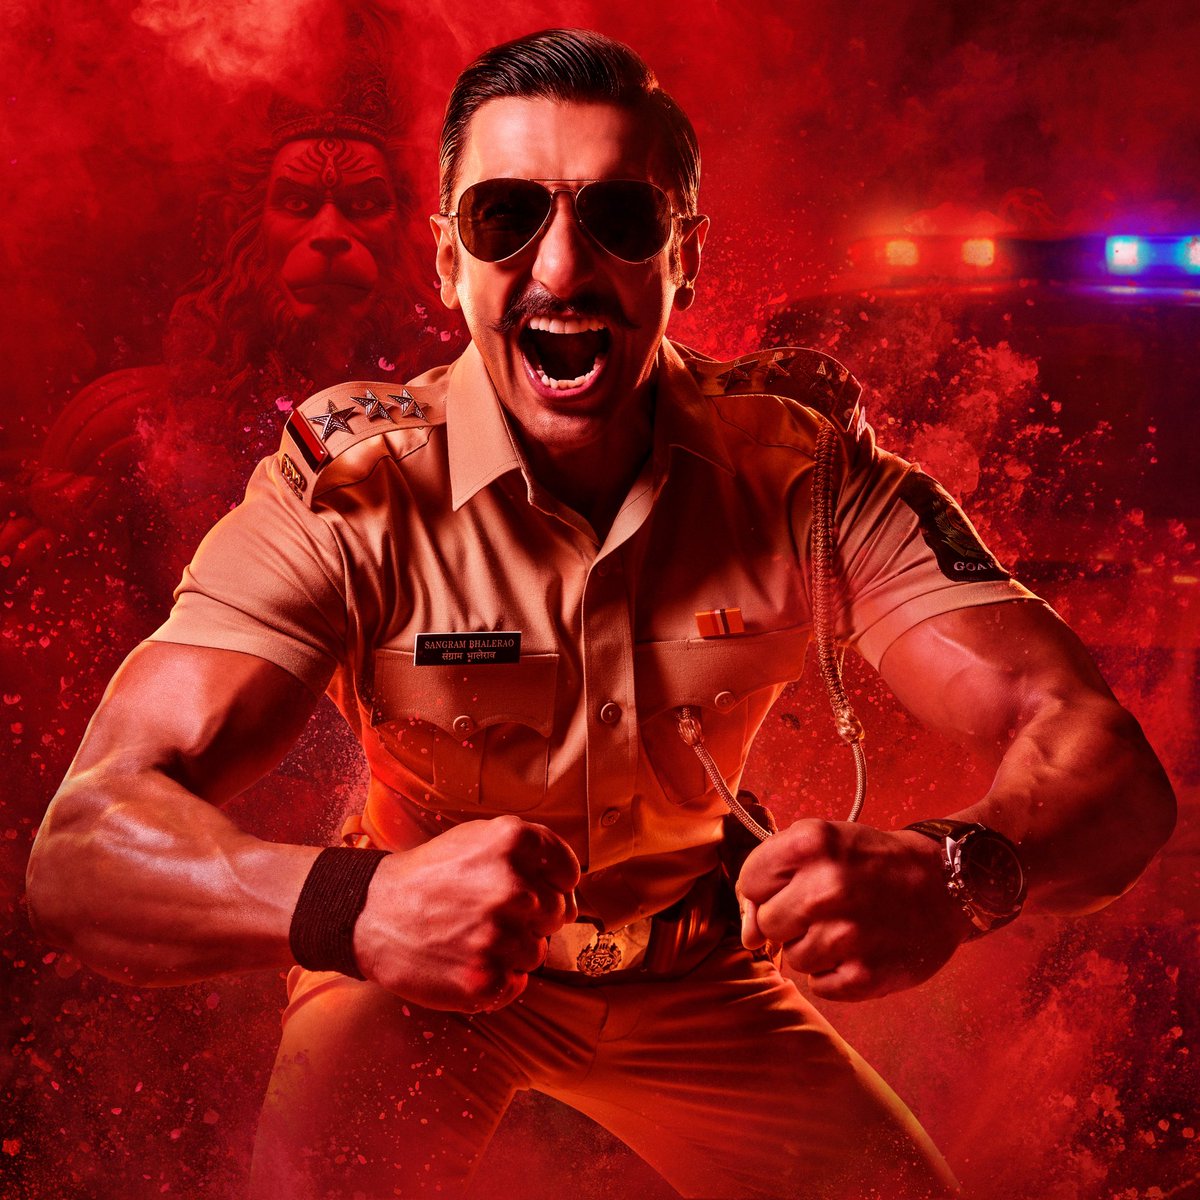 The most notorious officer of my squad, #Simmba! #SinghamAgain @RanveerOfficial @ADFFilms @RSPicturez @jiostudios @RelianceEnt #Cinergy